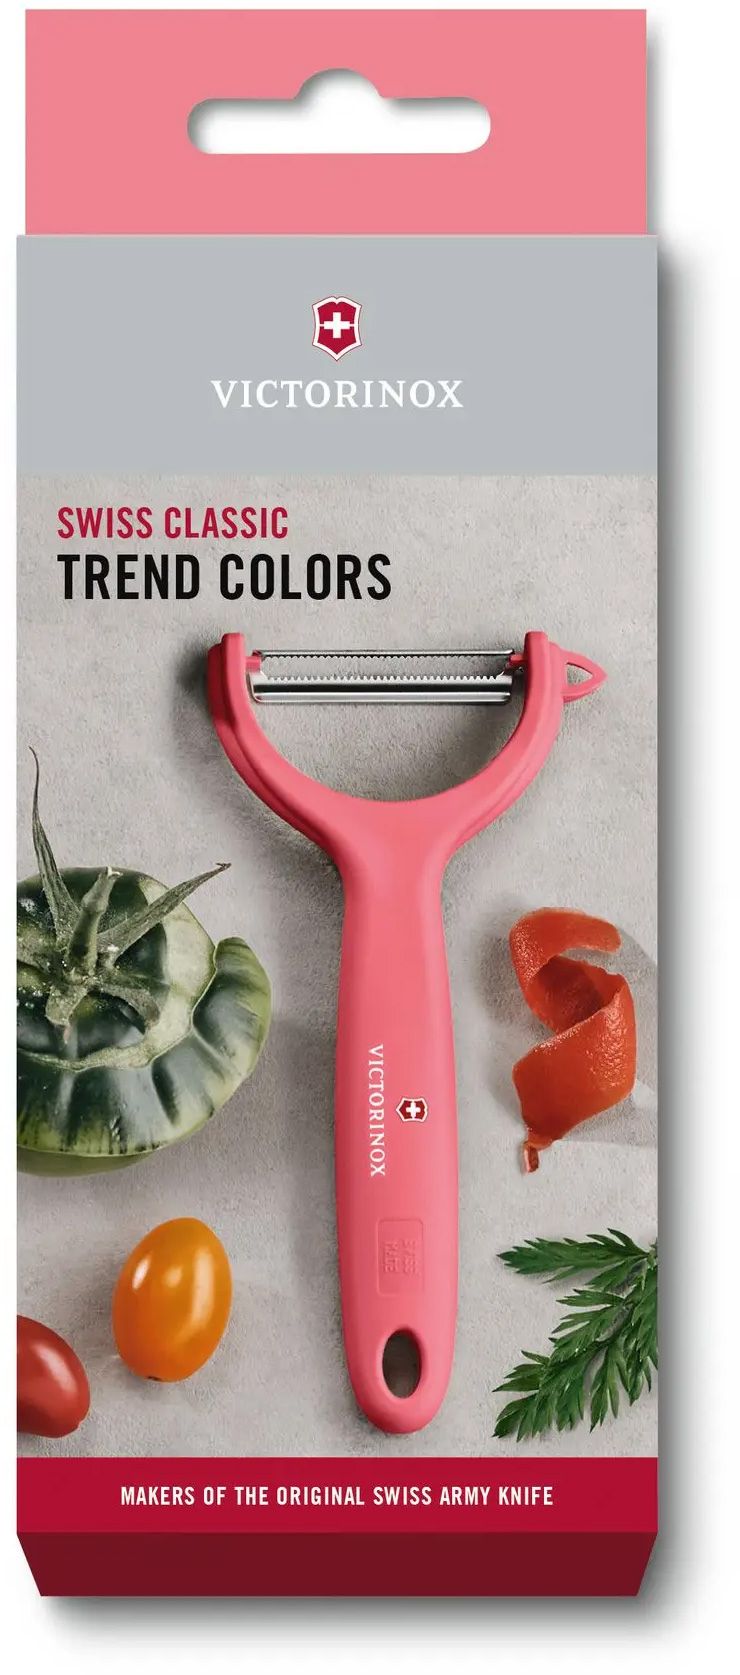 Victorinox 7.6079.1 Tomato and Kiwi Kitchen Peeler for Peeling Firm Fruit  and Vegetables with Ease With a Micro Serrated Edge Blade in Red, 6.9 inches